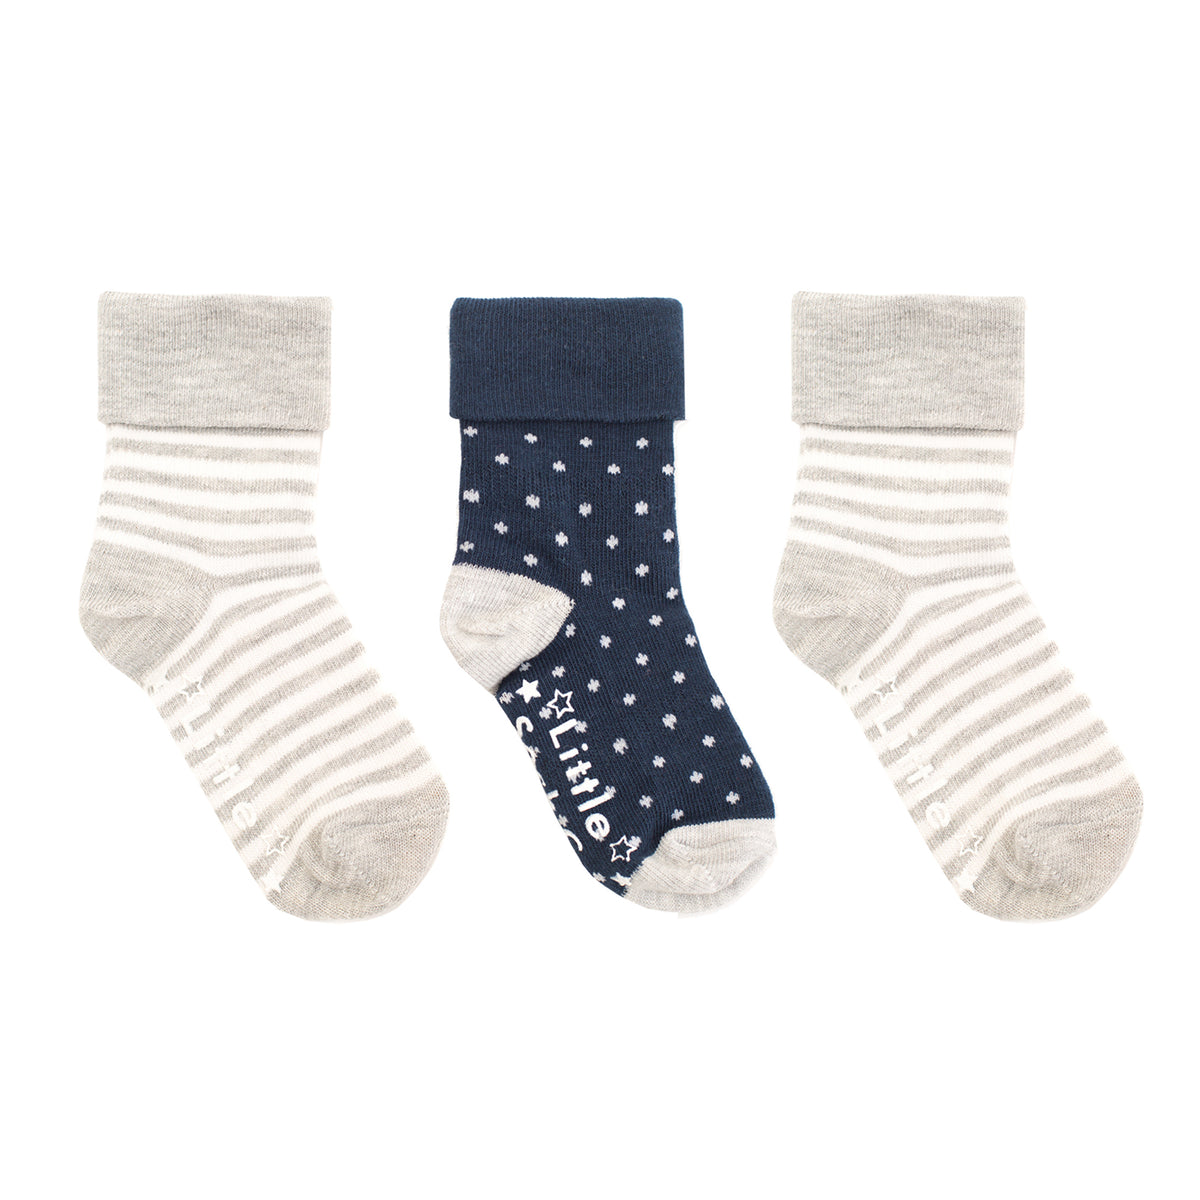 Non-Slip Stay on Baby and Toddler Socks - Unisex 3 Pack in Navy & Grey